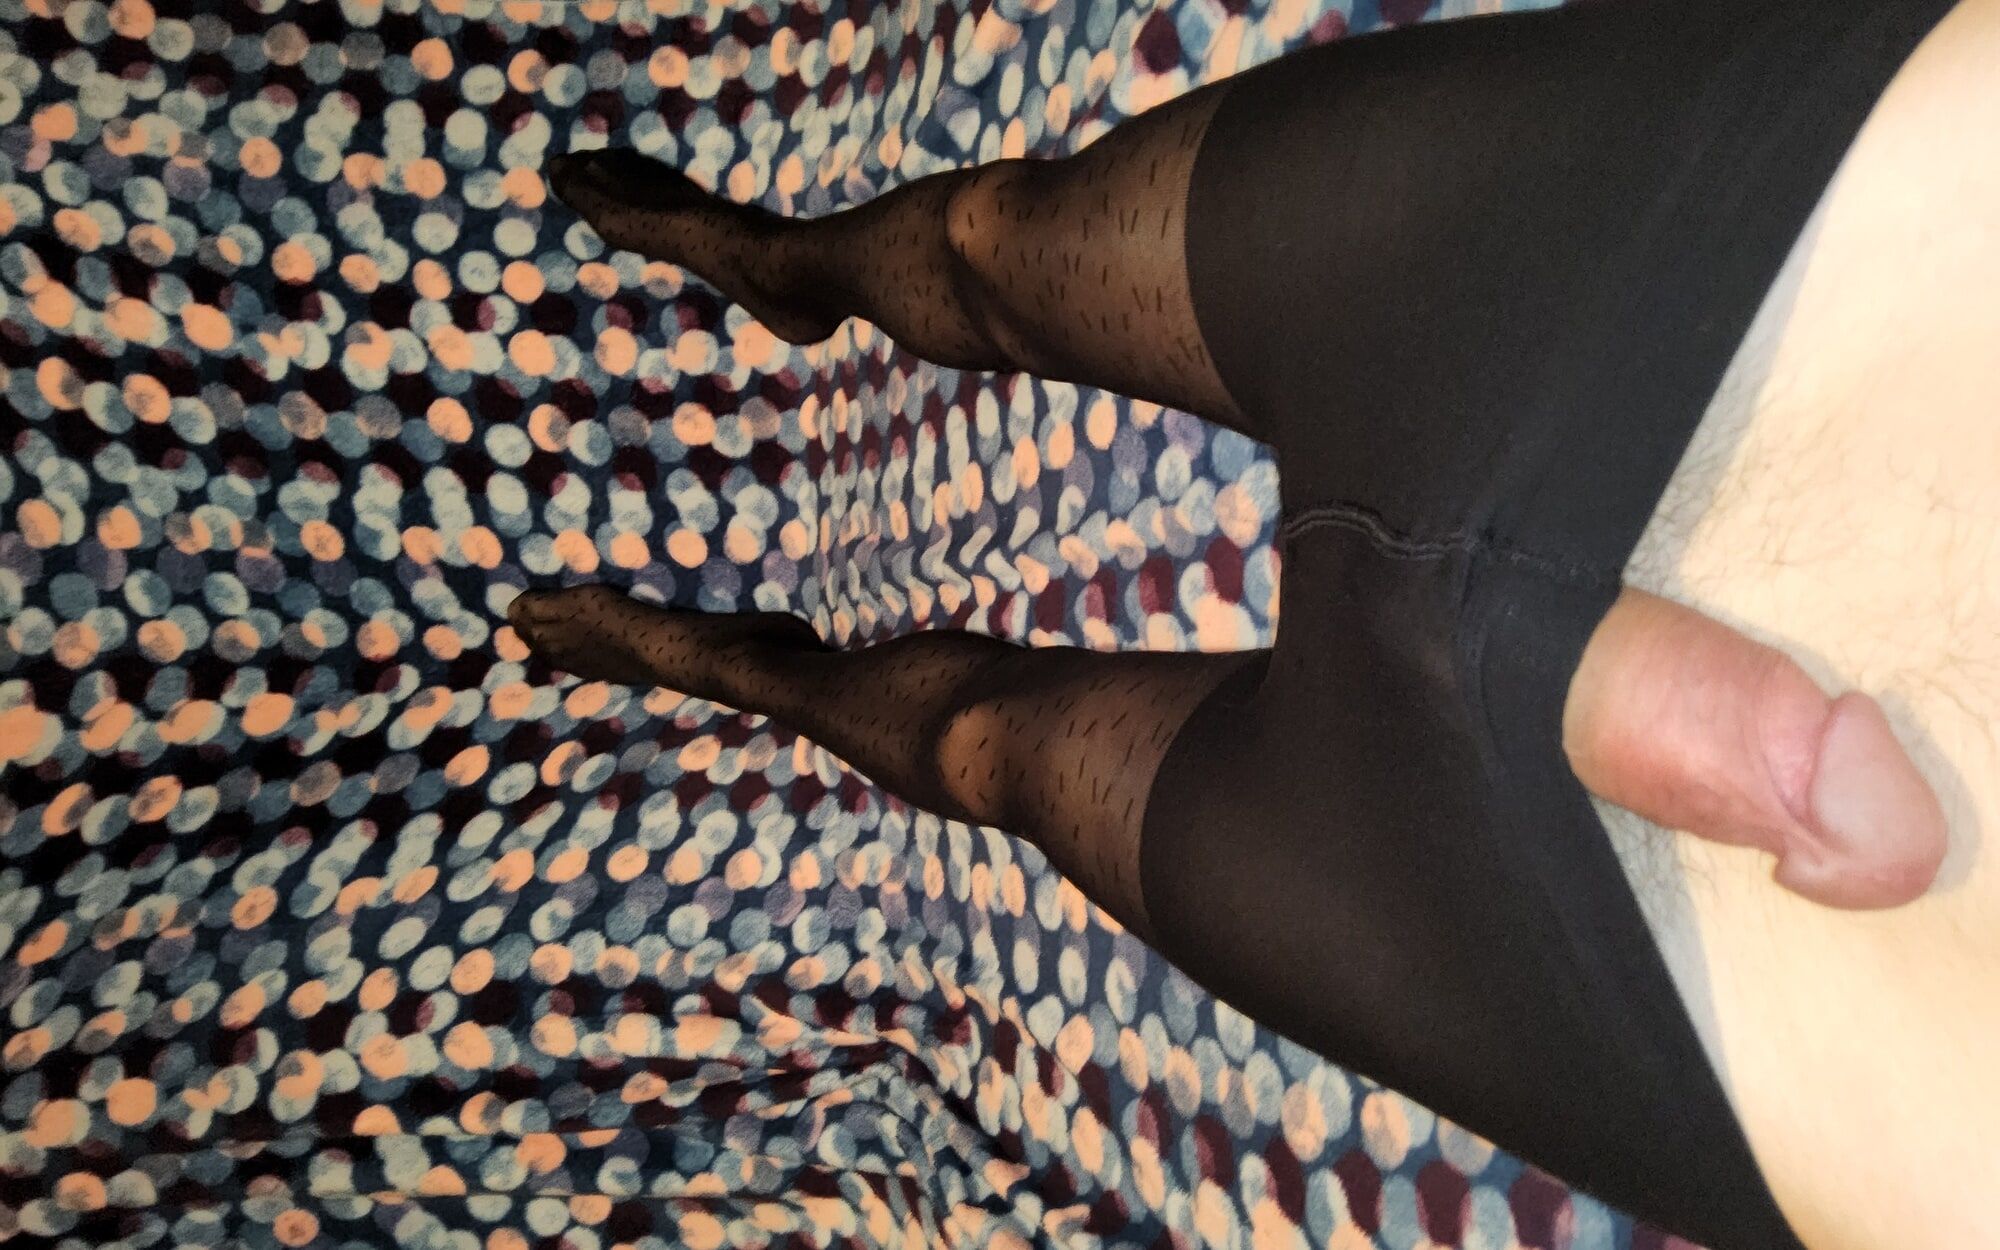 Another Black Pantyhose #5